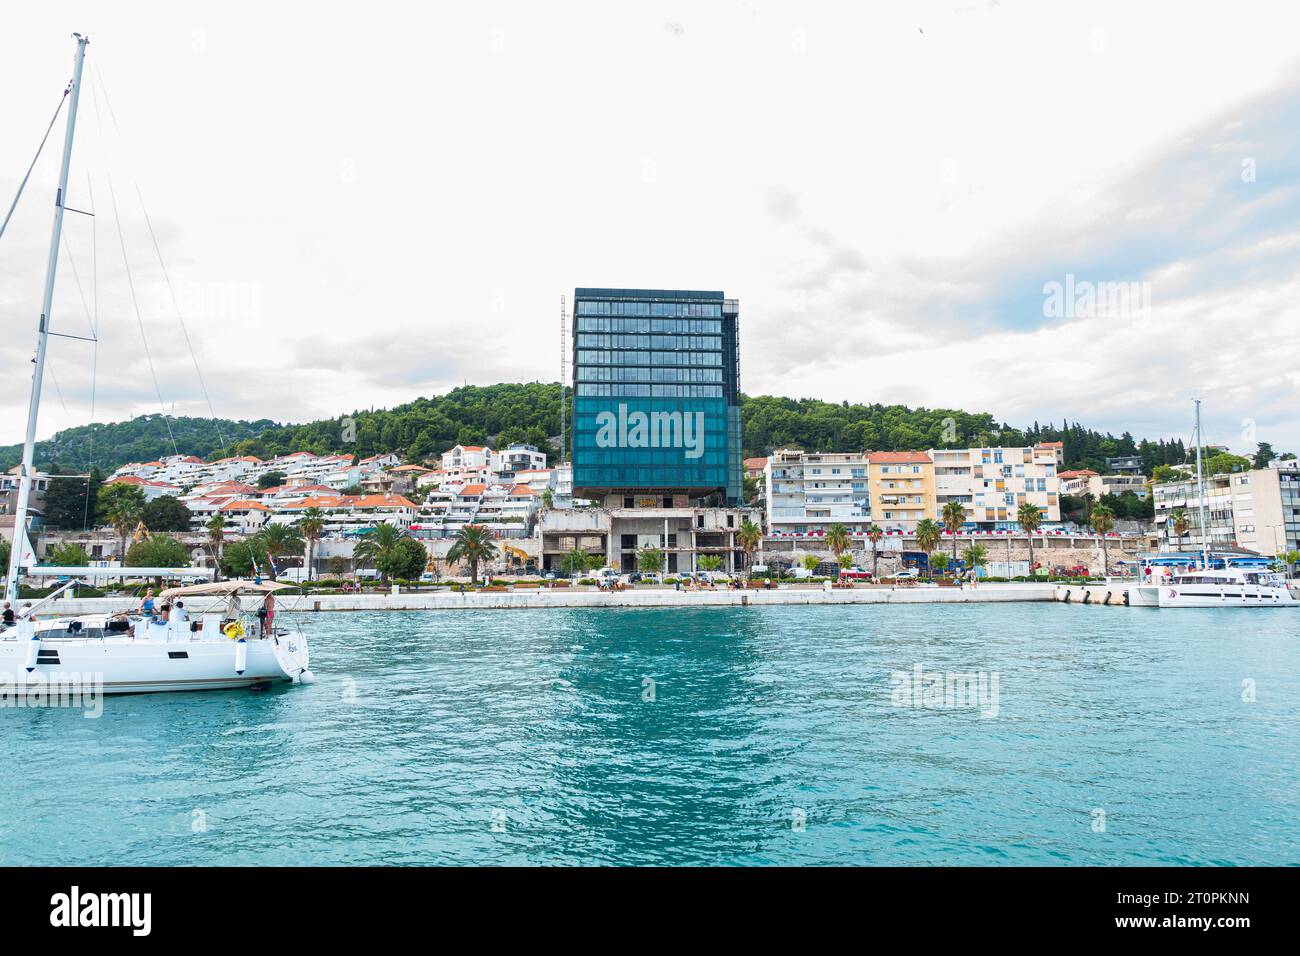 Hotel Marjan in Split, which has been out of function since Zeljko Kerum took over in 2006 and was bought by Rovinj's Adris Group at the end of 2019, Stock Photo